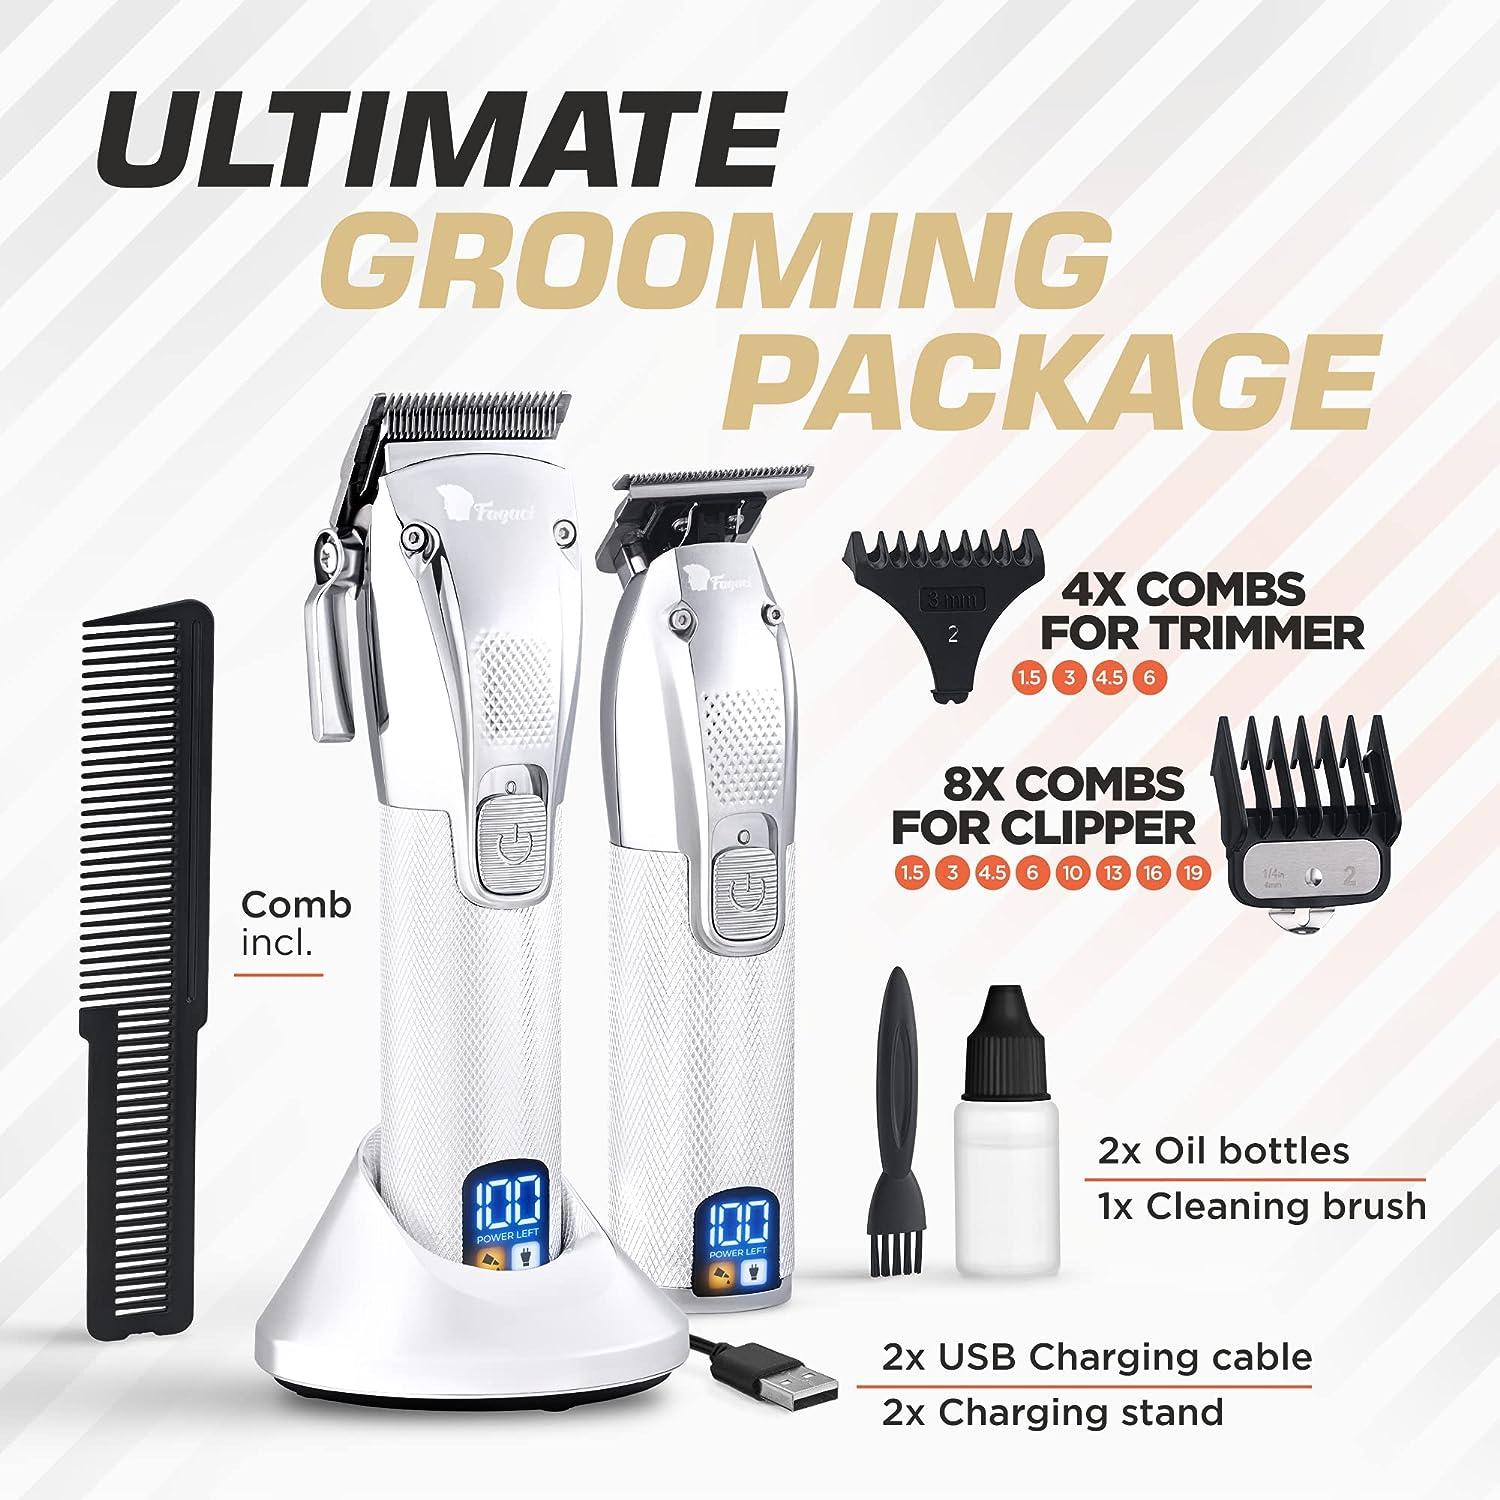 Fagaci Professional Hair Clippers Clippers Haircut Men Cutting, Cabello, with Power Barber for Maquina Cutting, Trimmers Hair Precise Barber for Cortar Kit Turbo Hair Clippers and Set, Set de Cordless